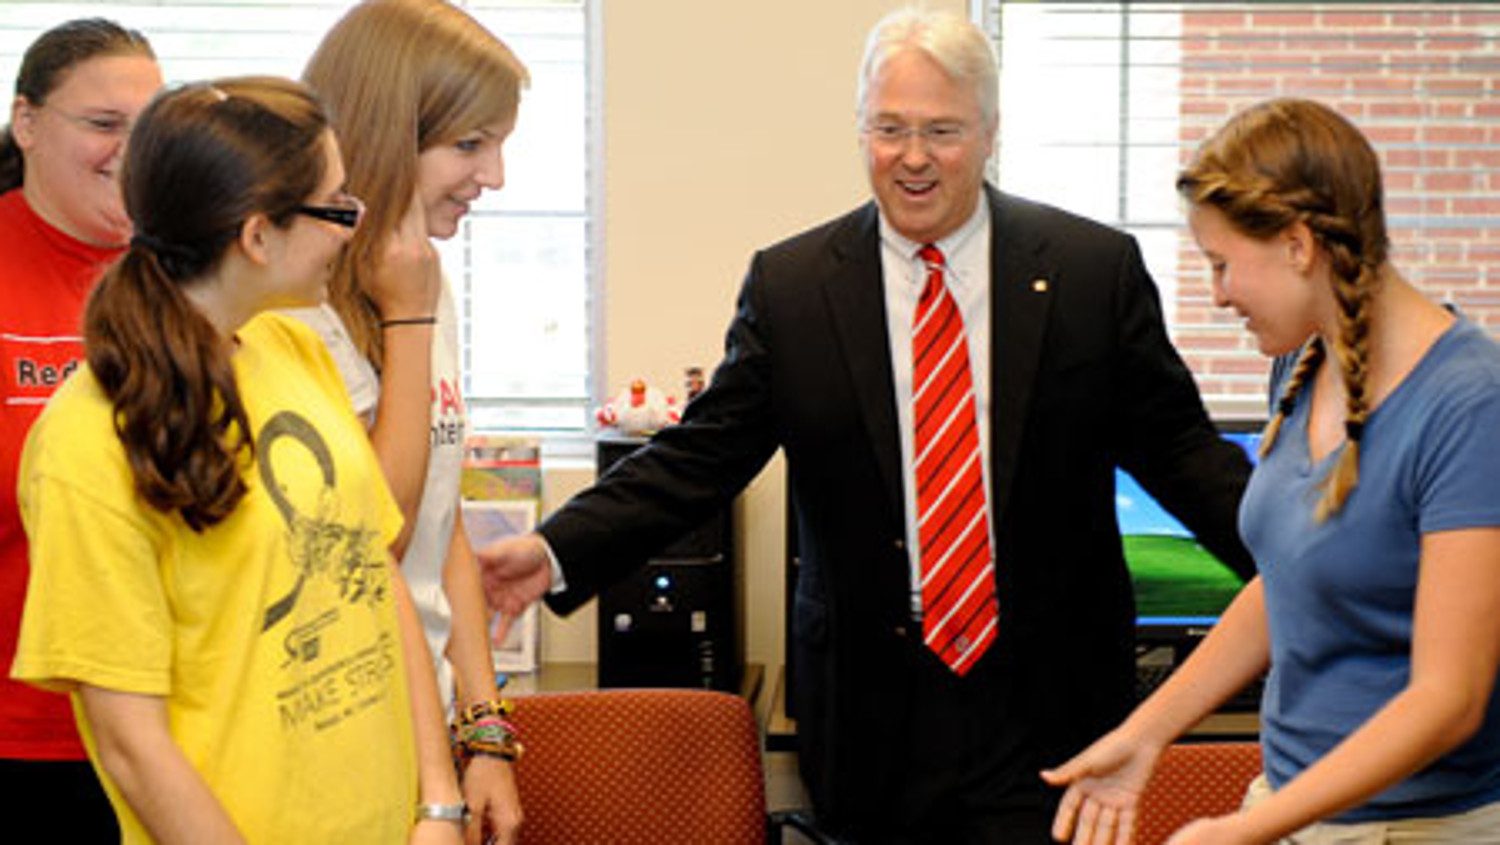 Chancellor Randy Woodson and students involved in VetPAC program